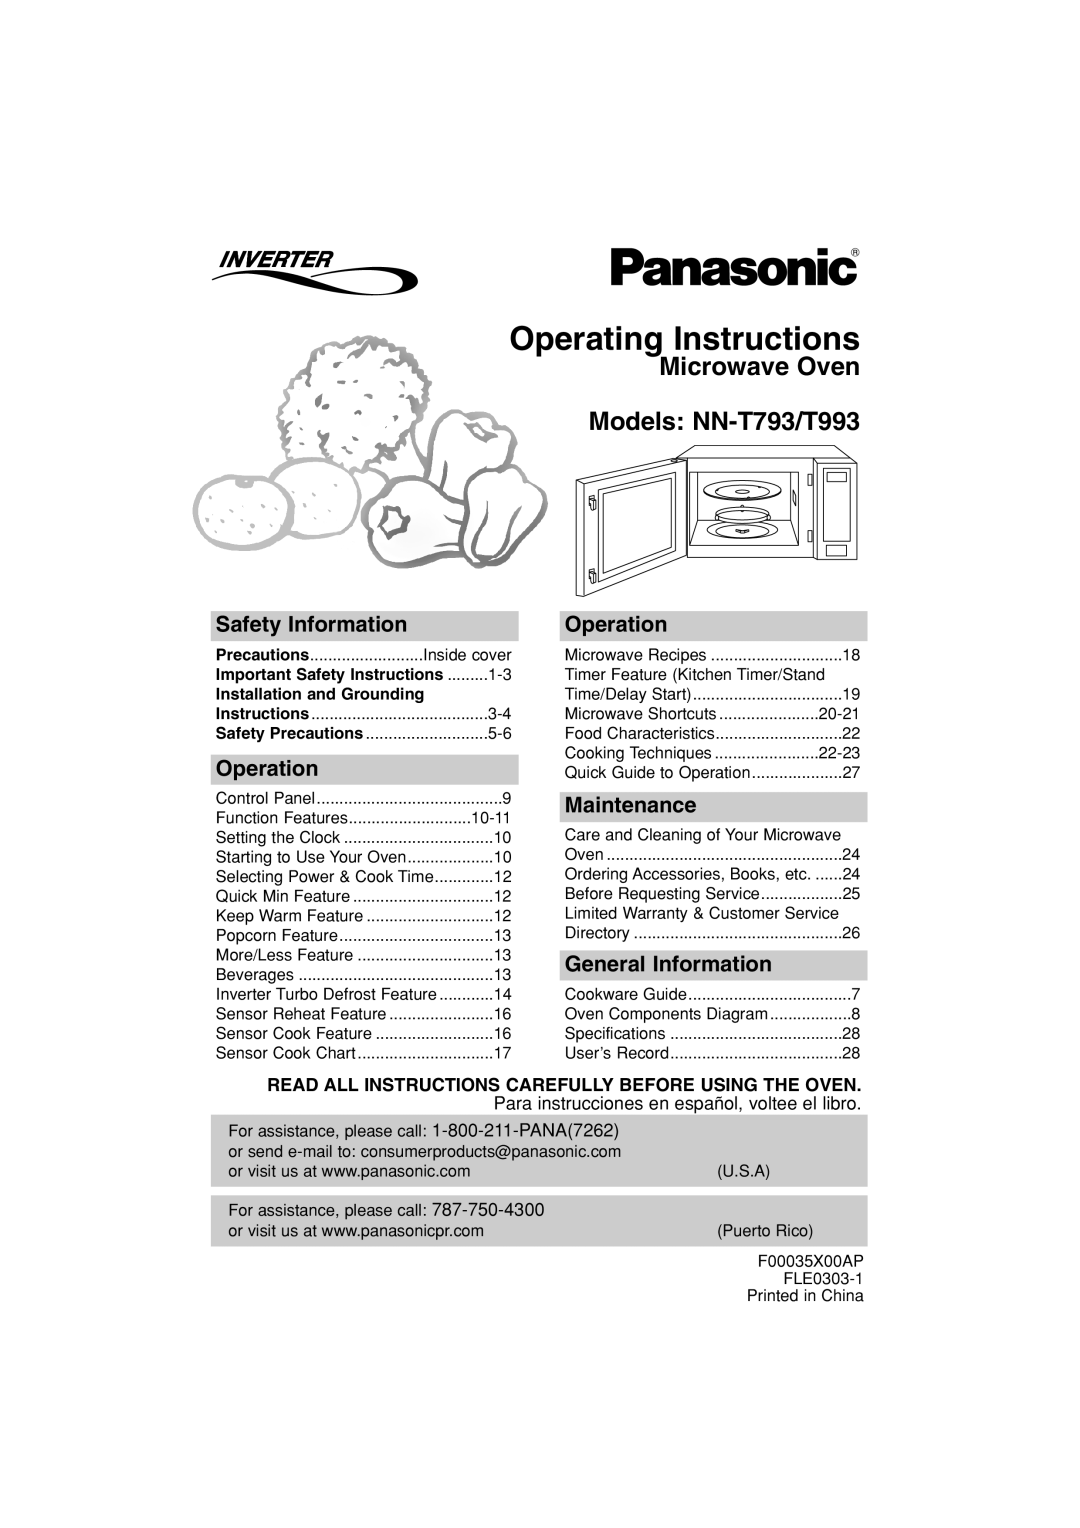 Panasonic NN-T993 operating instructions Operating Instructions, Microwave Oven Models NN-T793/T993, Safety Information 